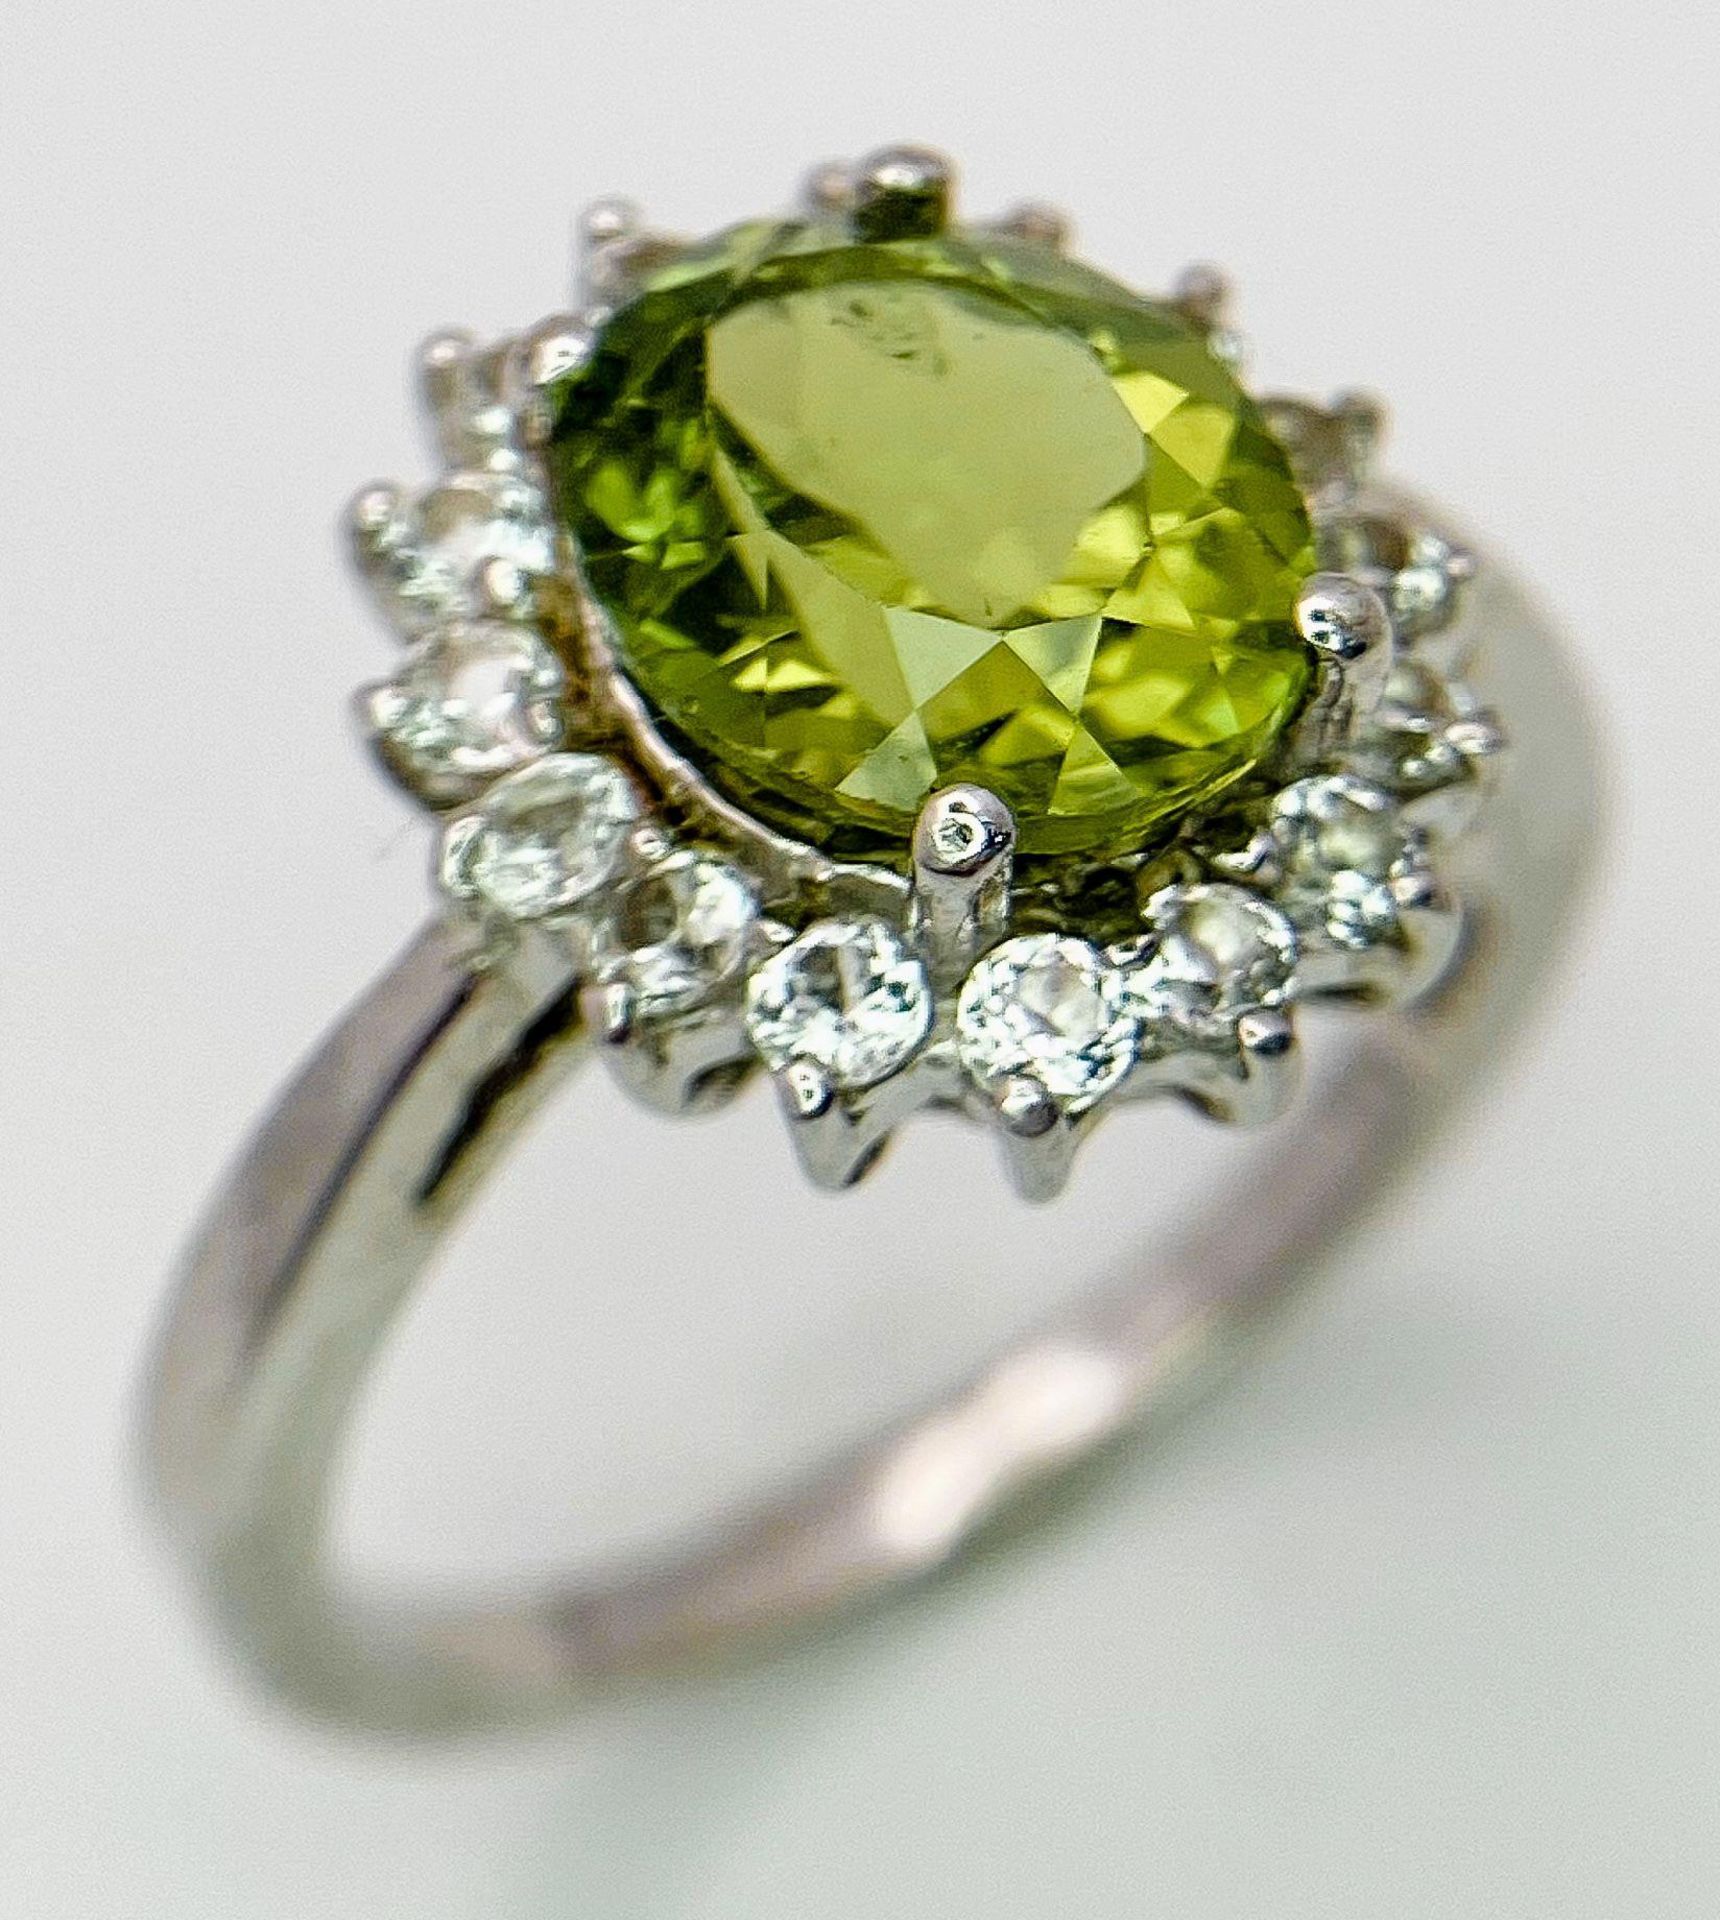 Three 925 Sterling Silver Gemstone Rings: Turquoise - Size T, Peridot - Size P and Ruby - Size R. - Image 5 of 15